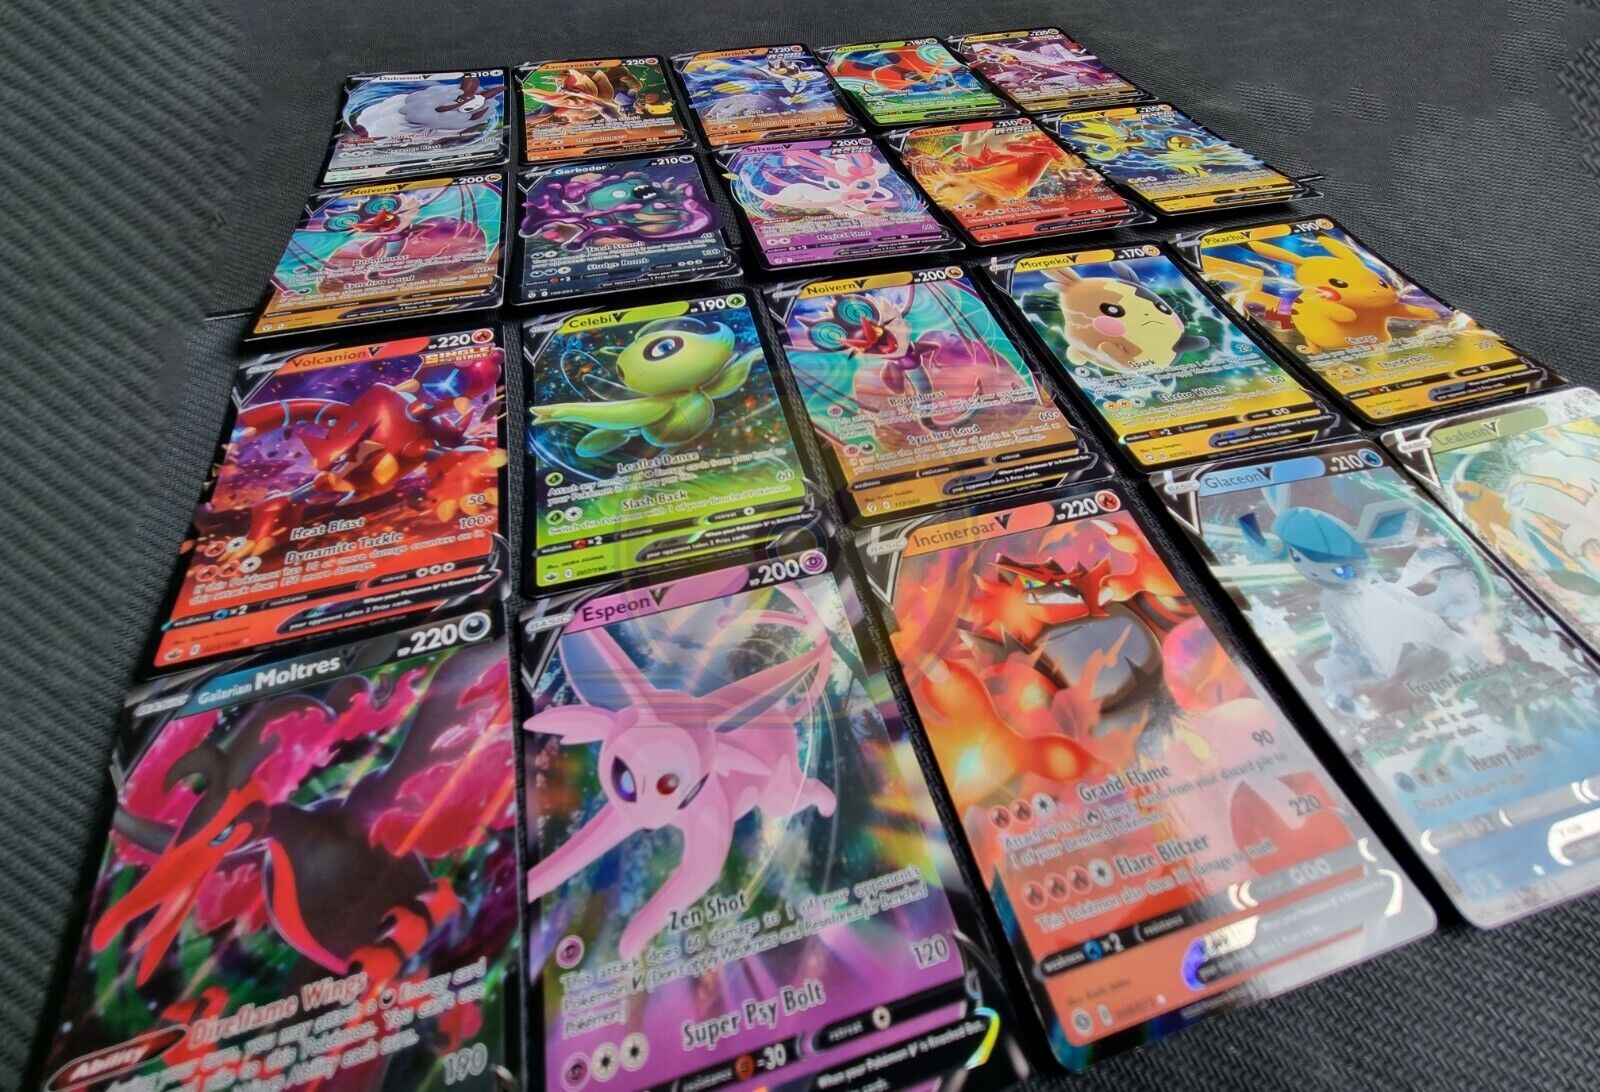 Why Collect Pokemon Cards